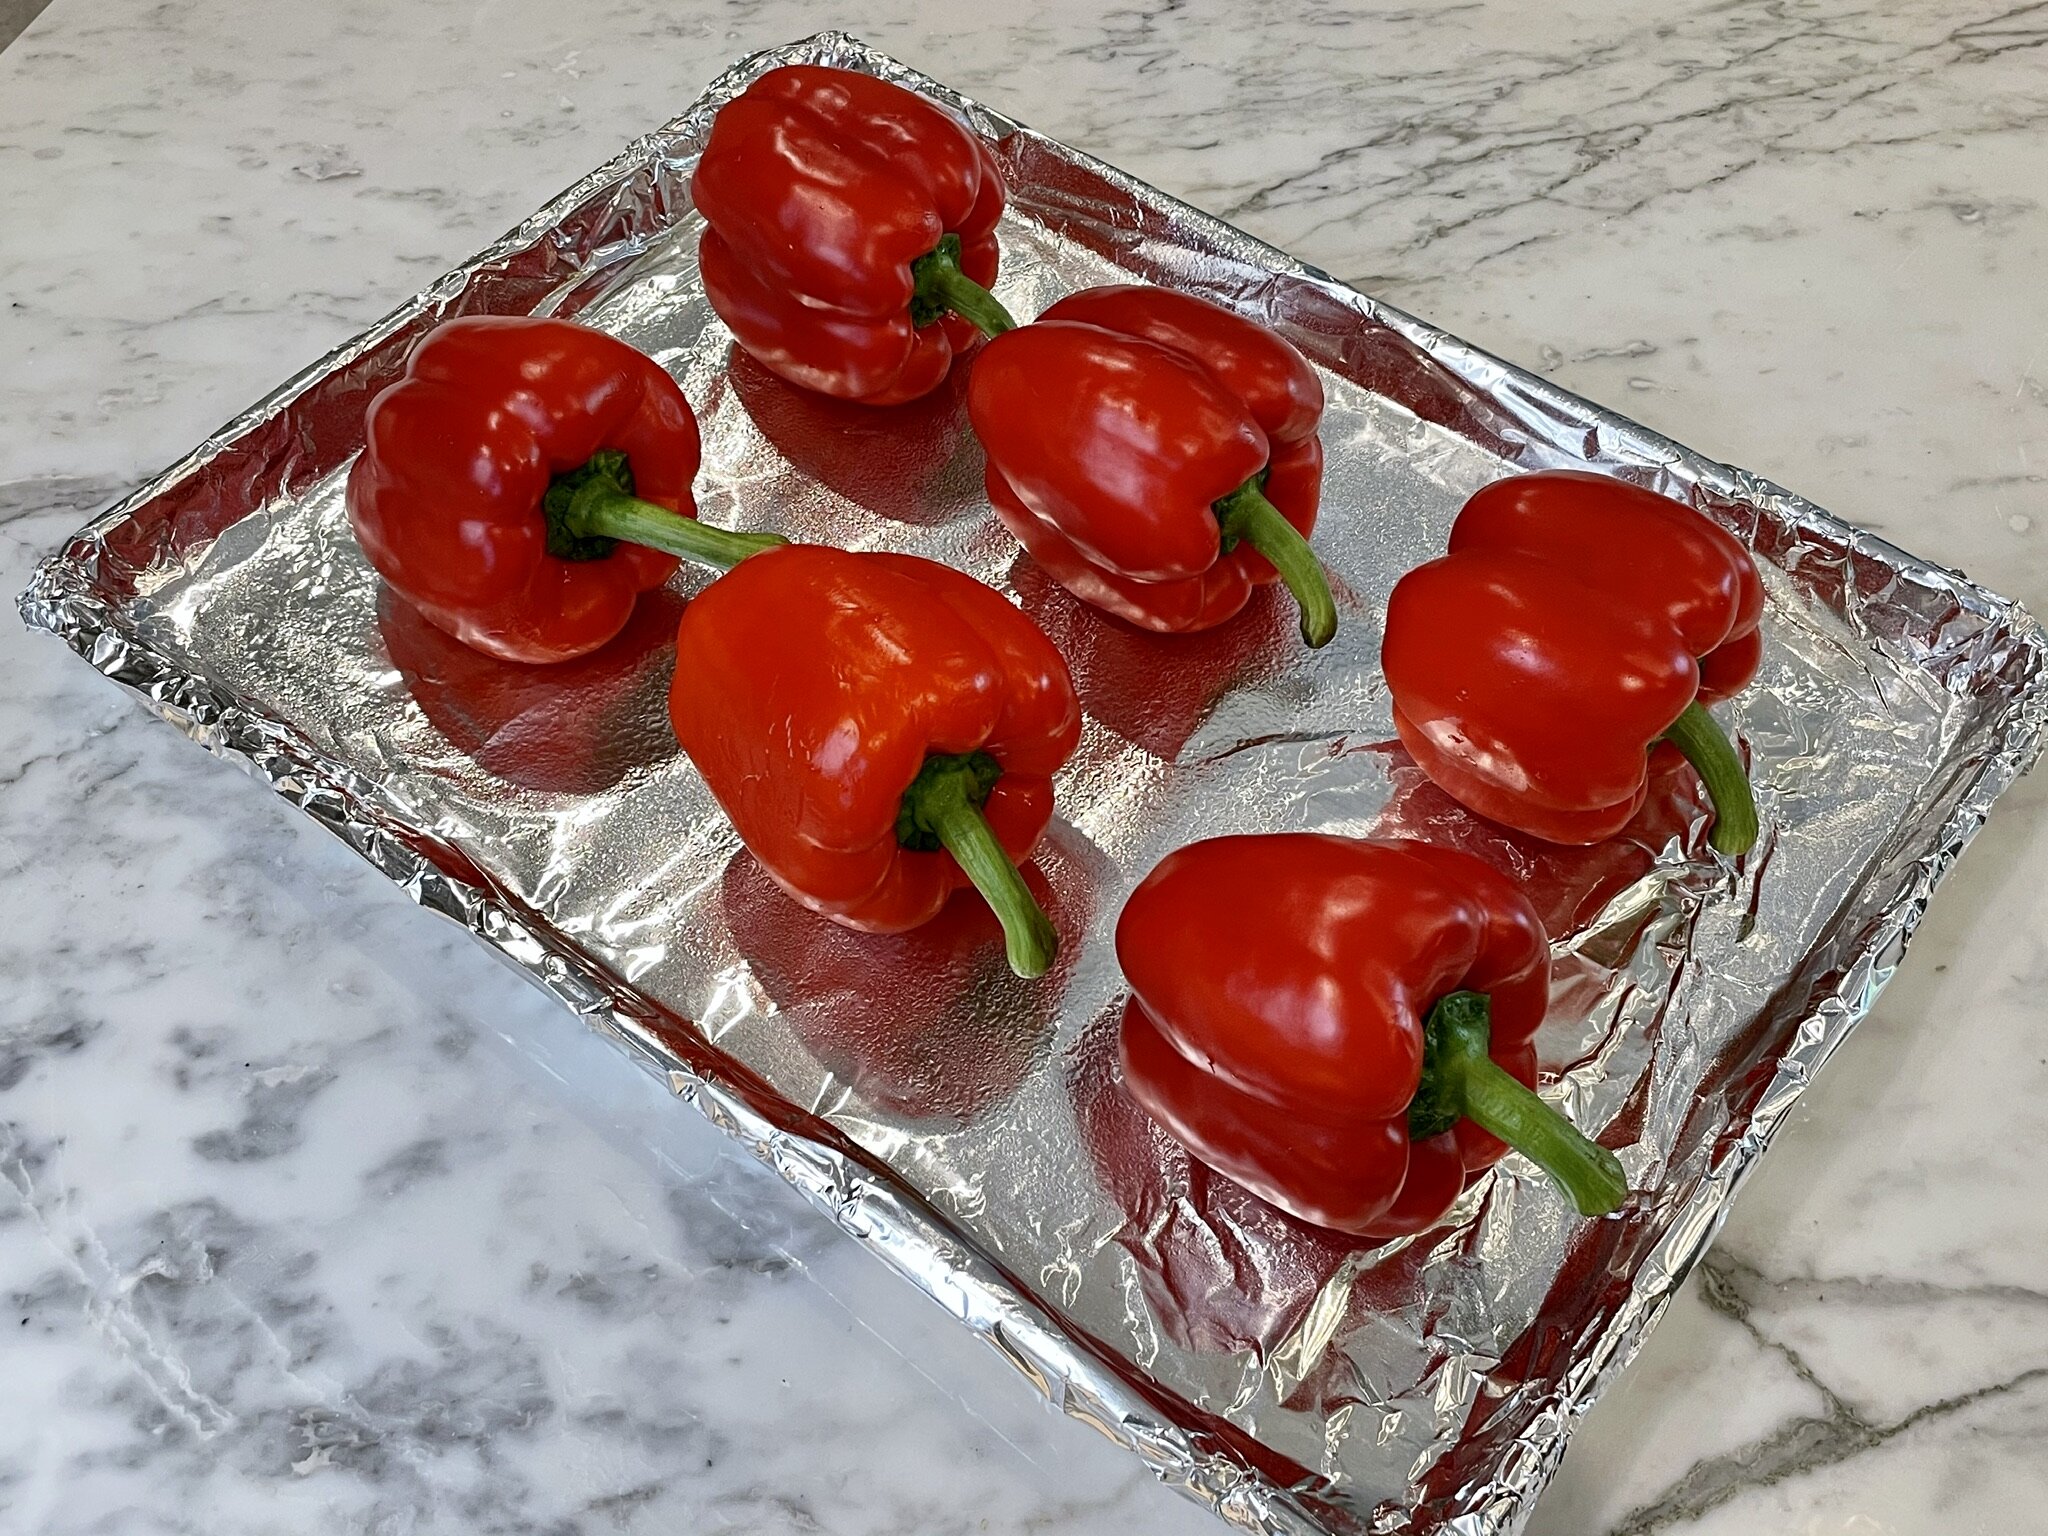 Roast peppers for 20 mins.